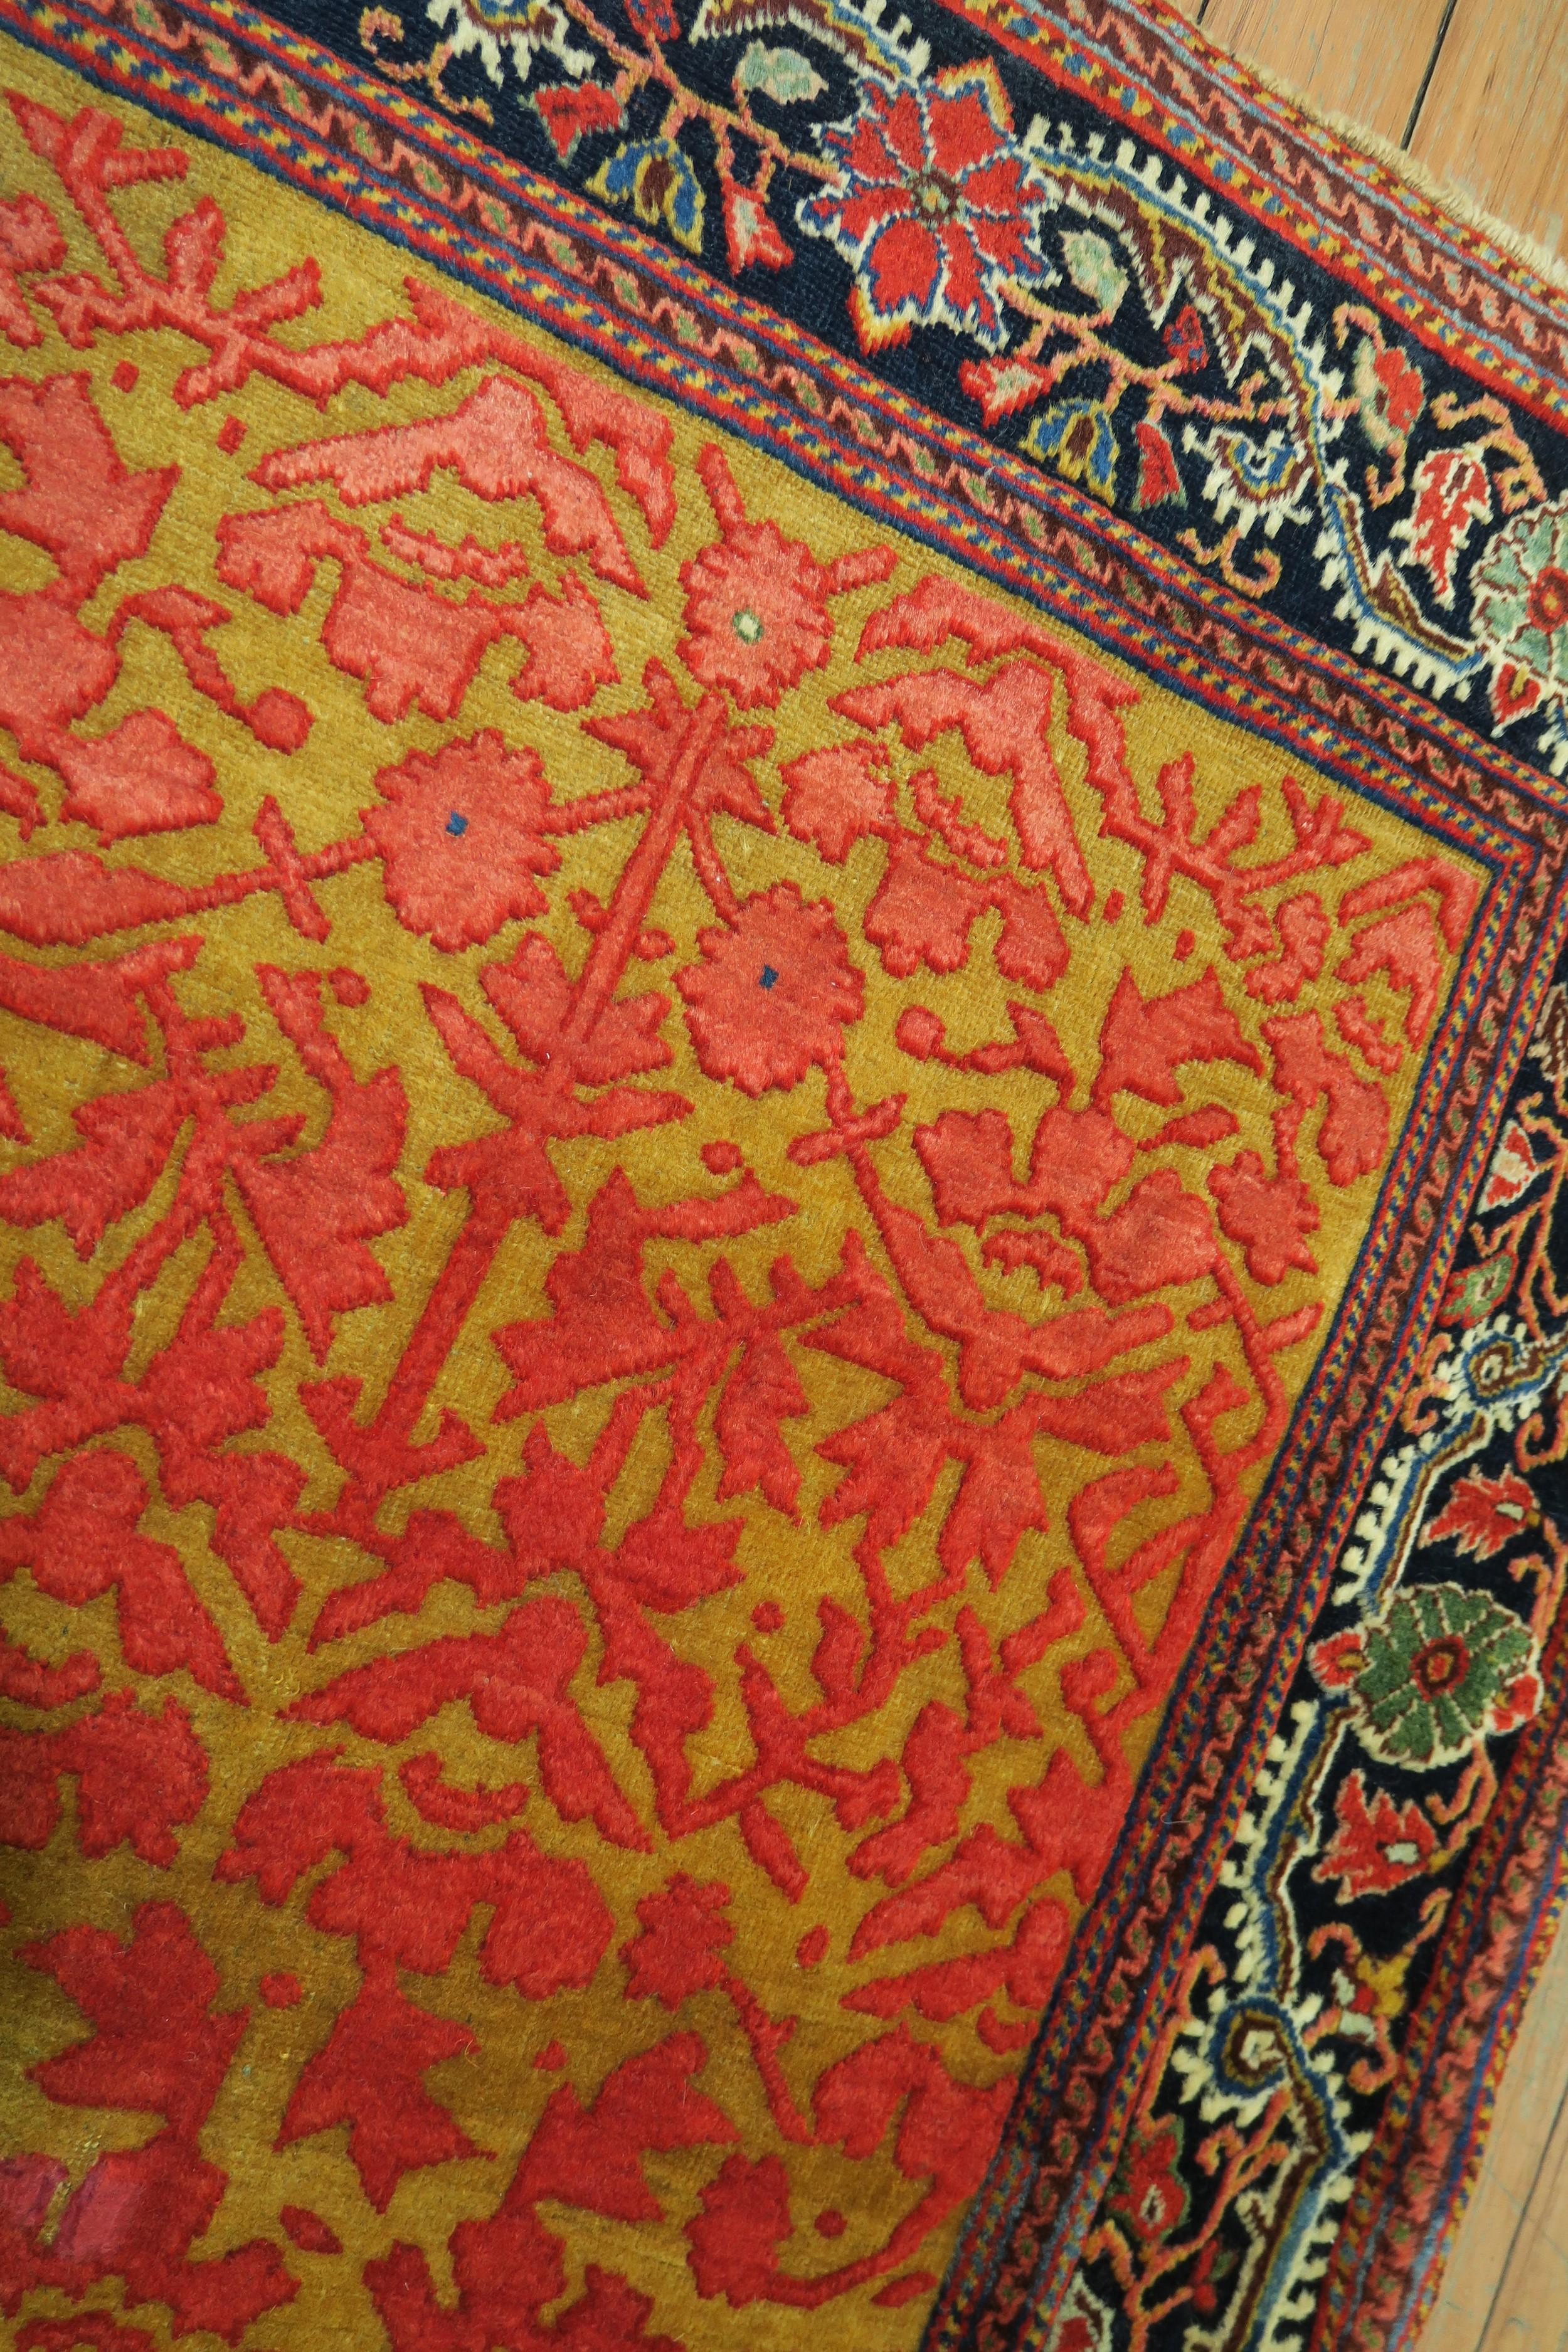 Jewel Tone Early 20th Century Superfine Quality Antique Persian Jozan Souf Mat For Sale 1